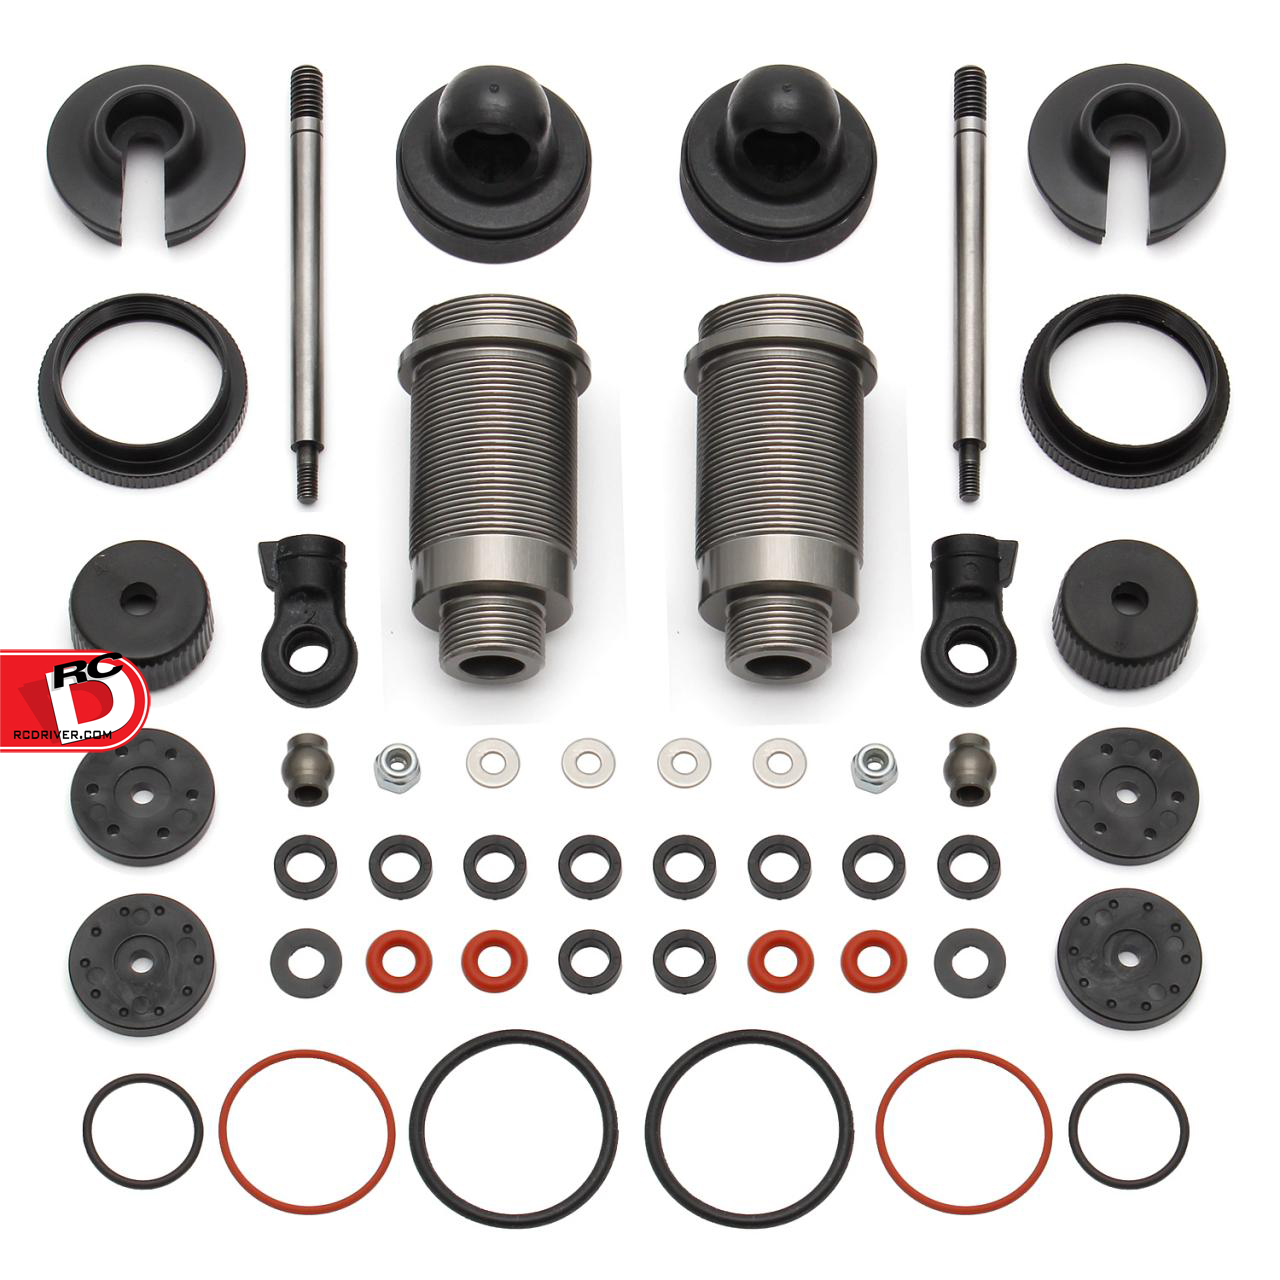 FT ProLite 4x4, ProSC 4x4, and ProRally 16mm Threaded Aluminum Shock Kit fo...